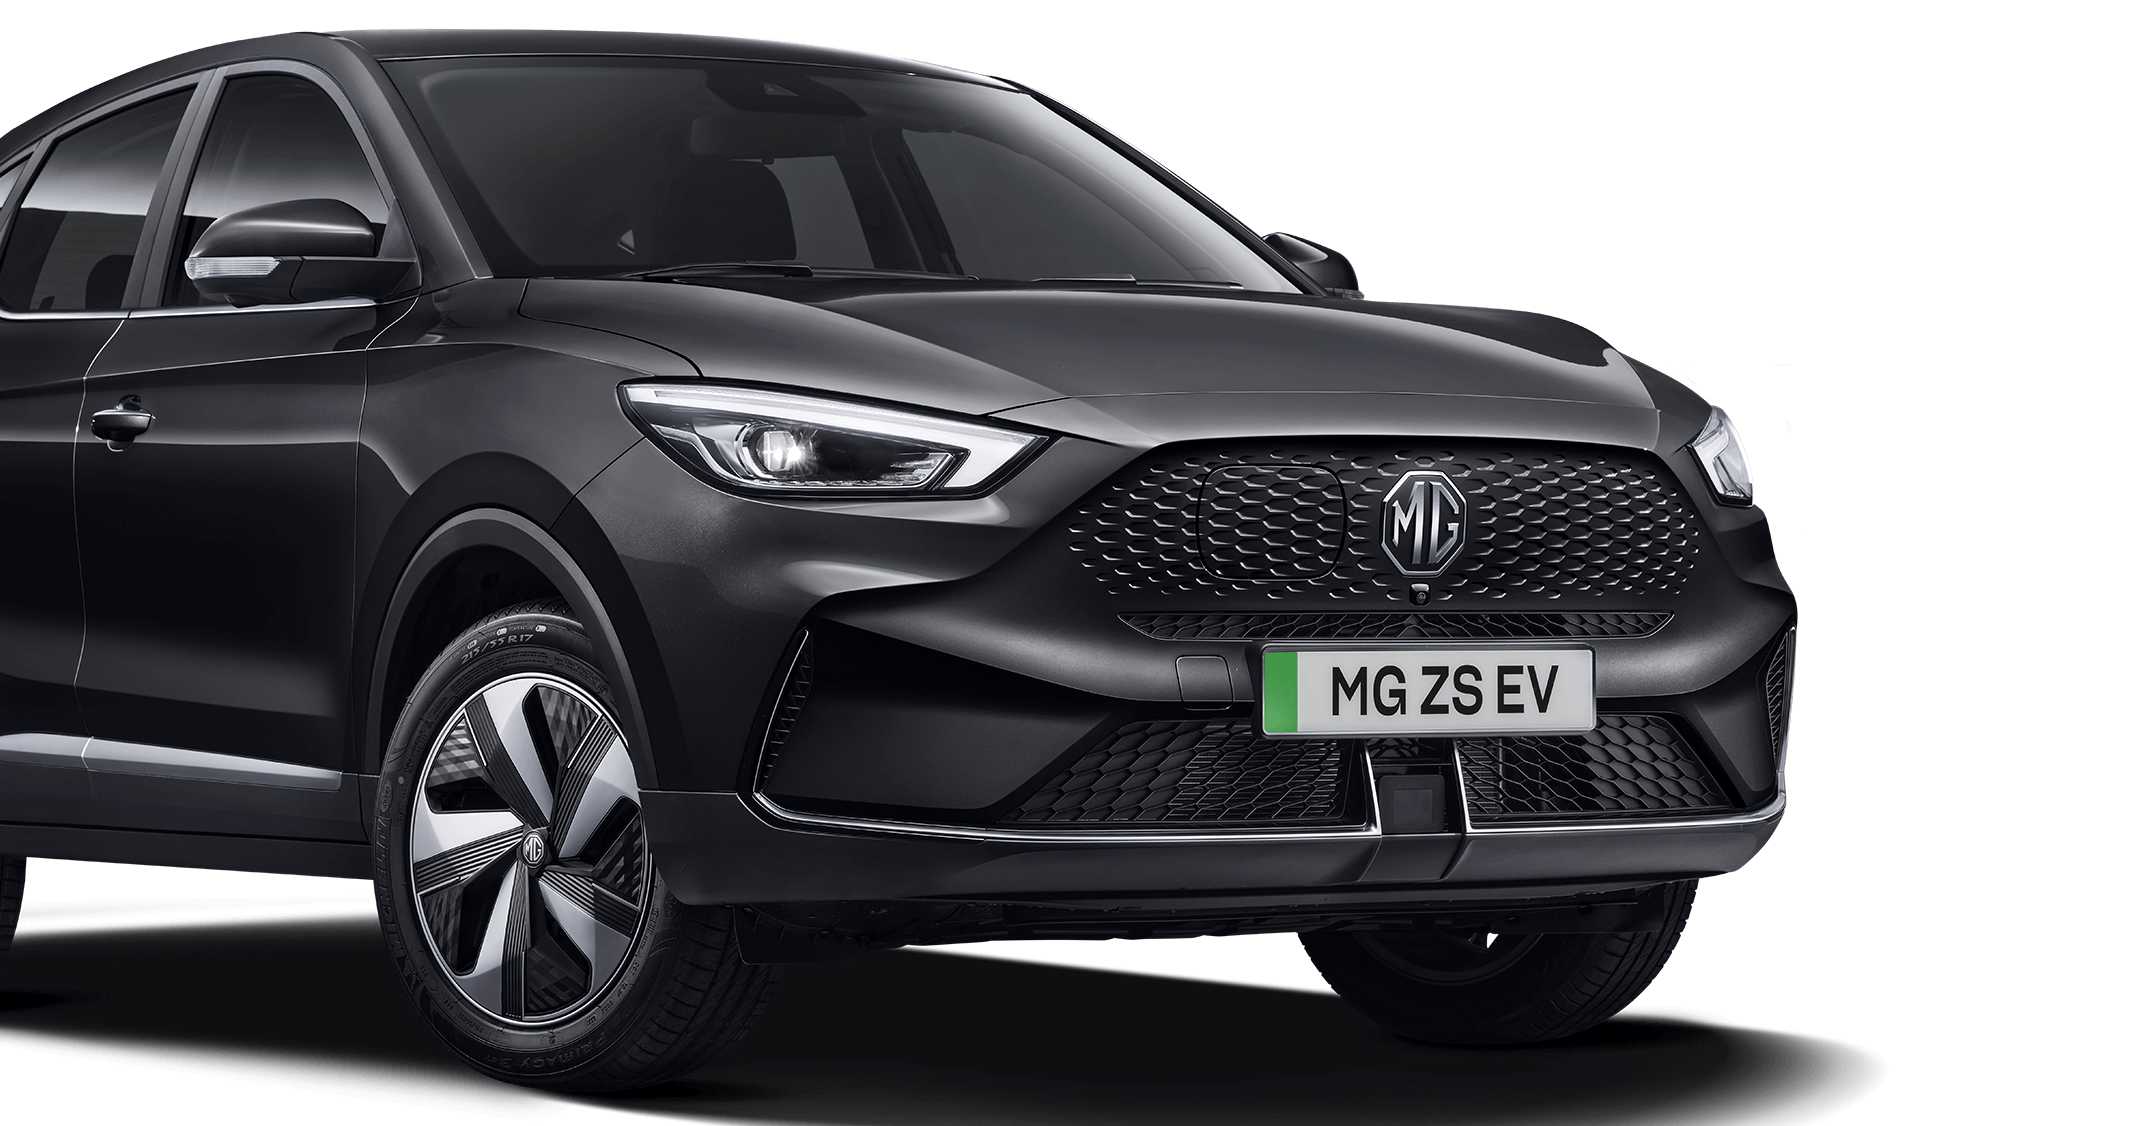 MG ZS EV Surpasses 10,000 Units Sales Milestone, Driving Electric Vehicle Adoption in India